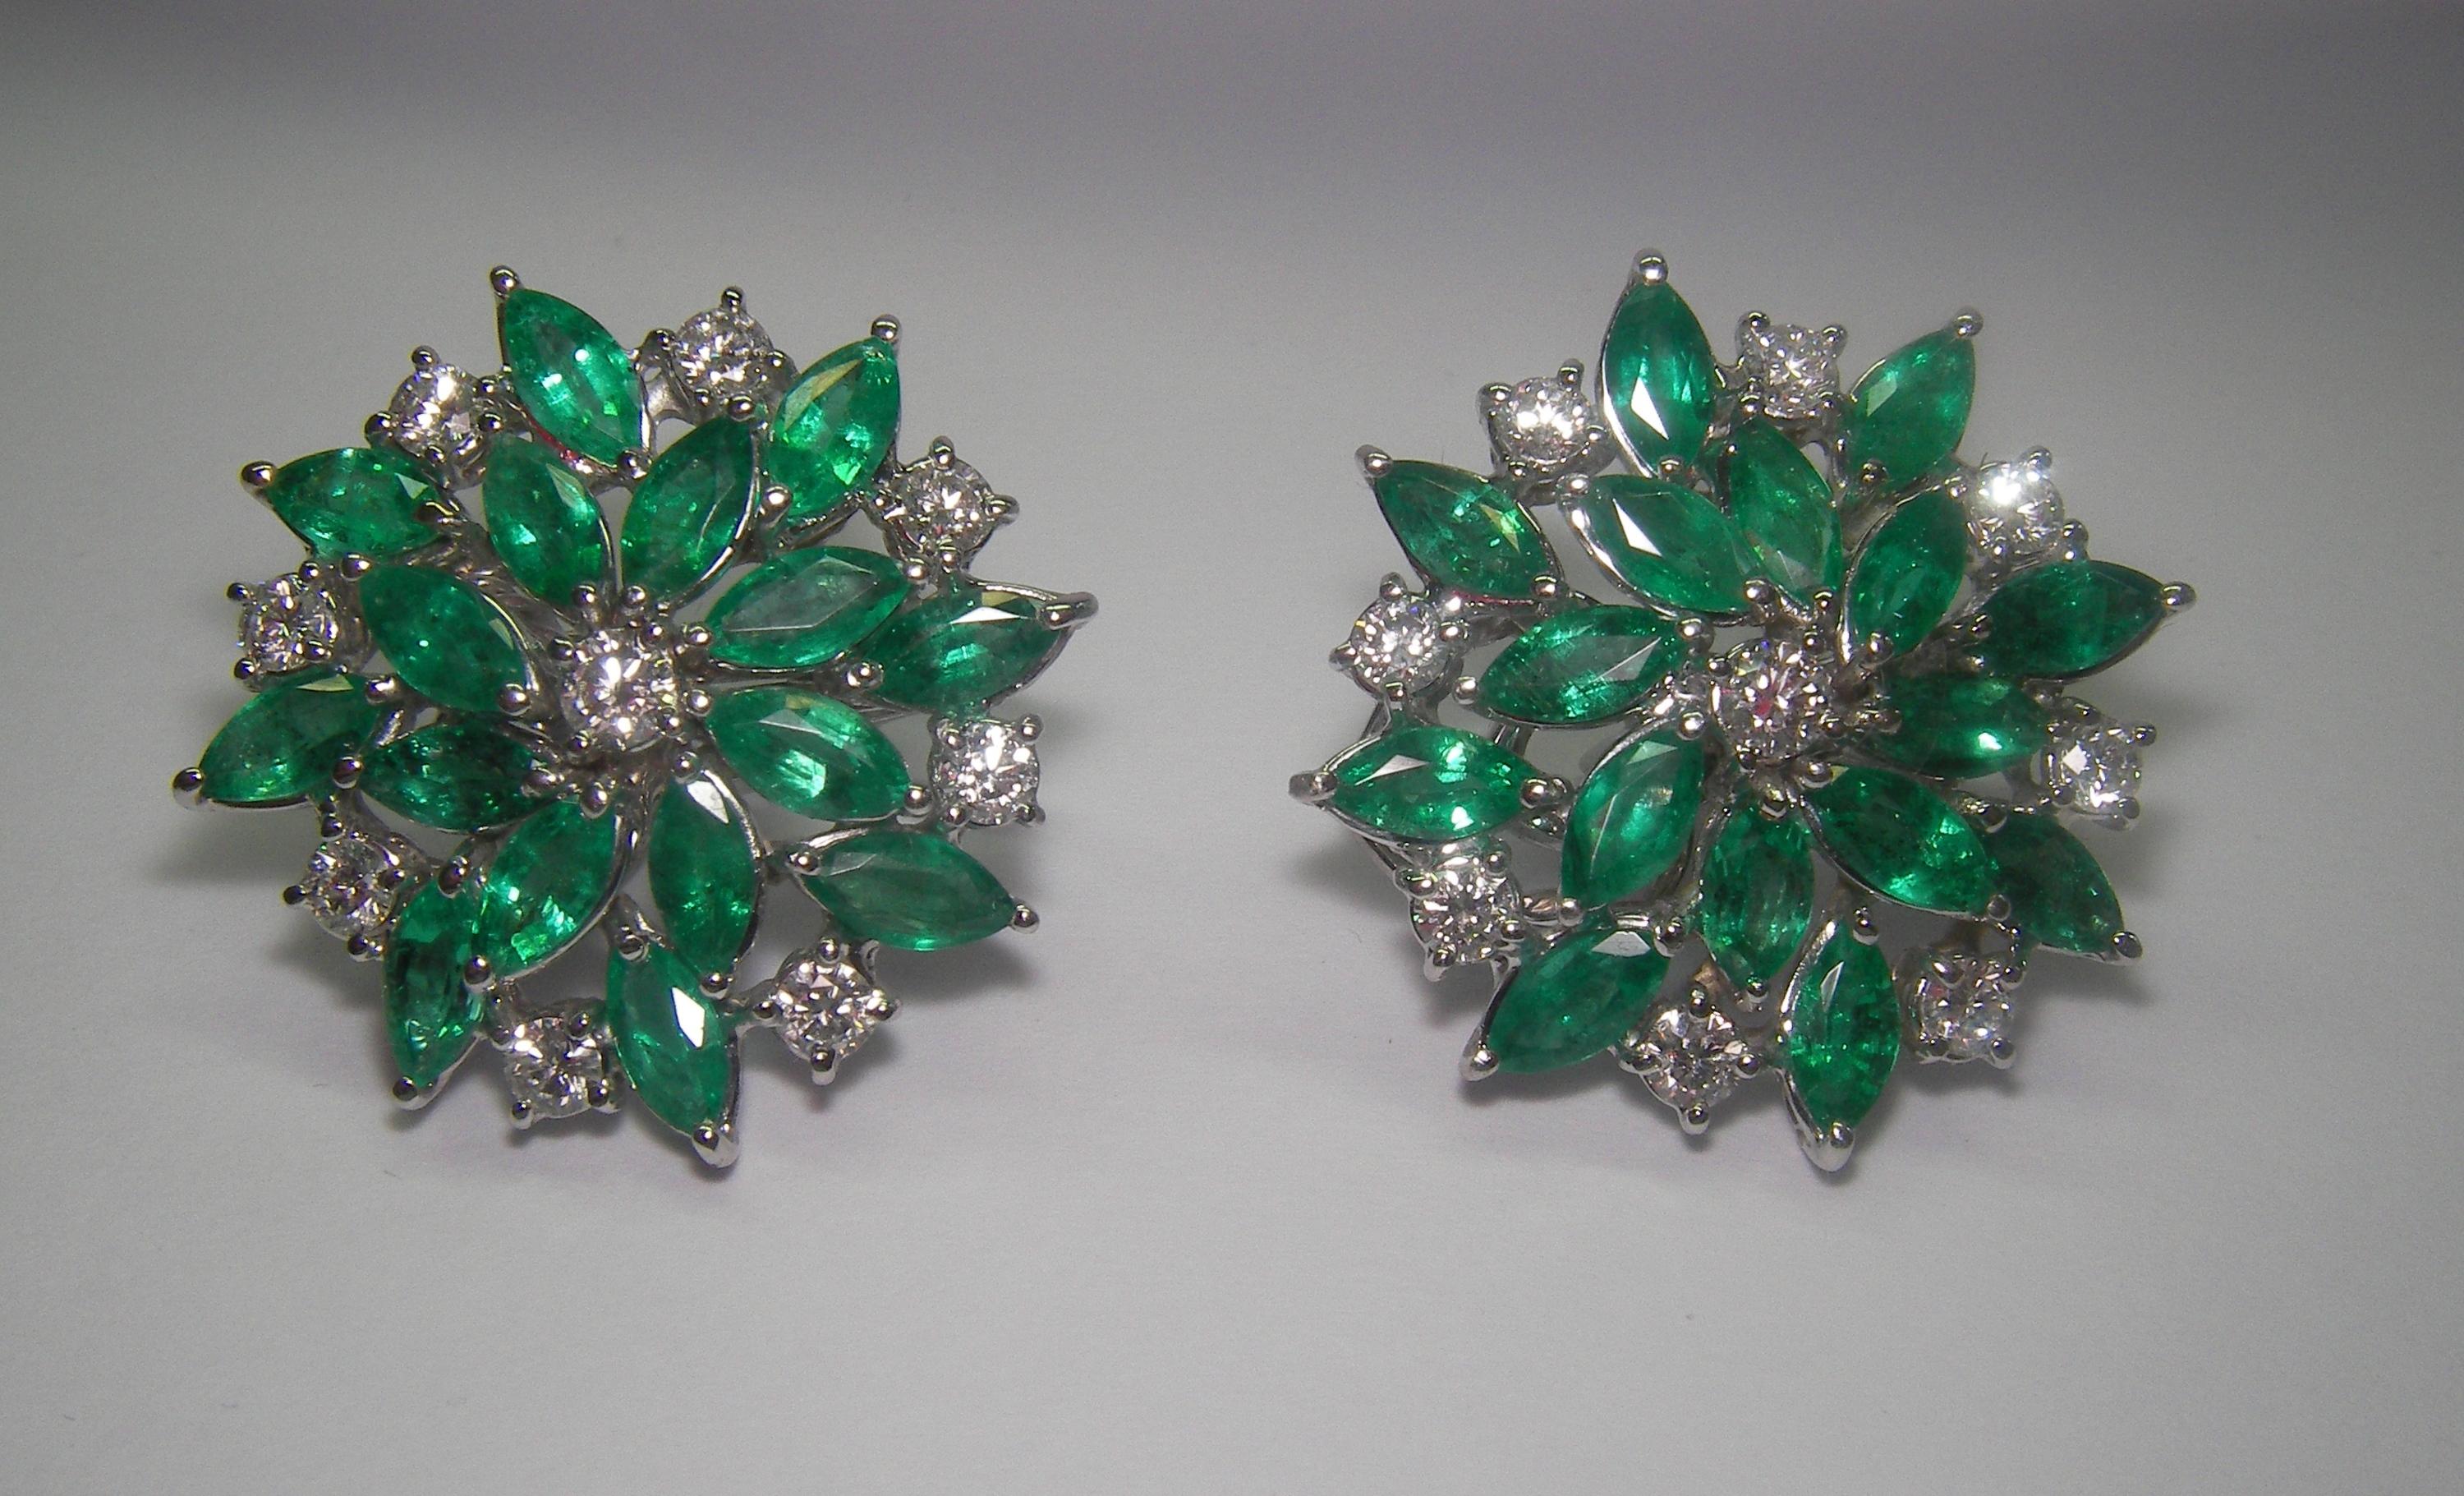 18 Karat White Gold Diamond  and Emeralds Stud Earrings

18 diamonds 1,39 Carat
32 Emeralds 6,62 Carat





Founded in 1974, Gianni Lazzaro is a family-owned jewelery company based out of Düsseldorf, Germany.
Although rooted in Germany, Gianni